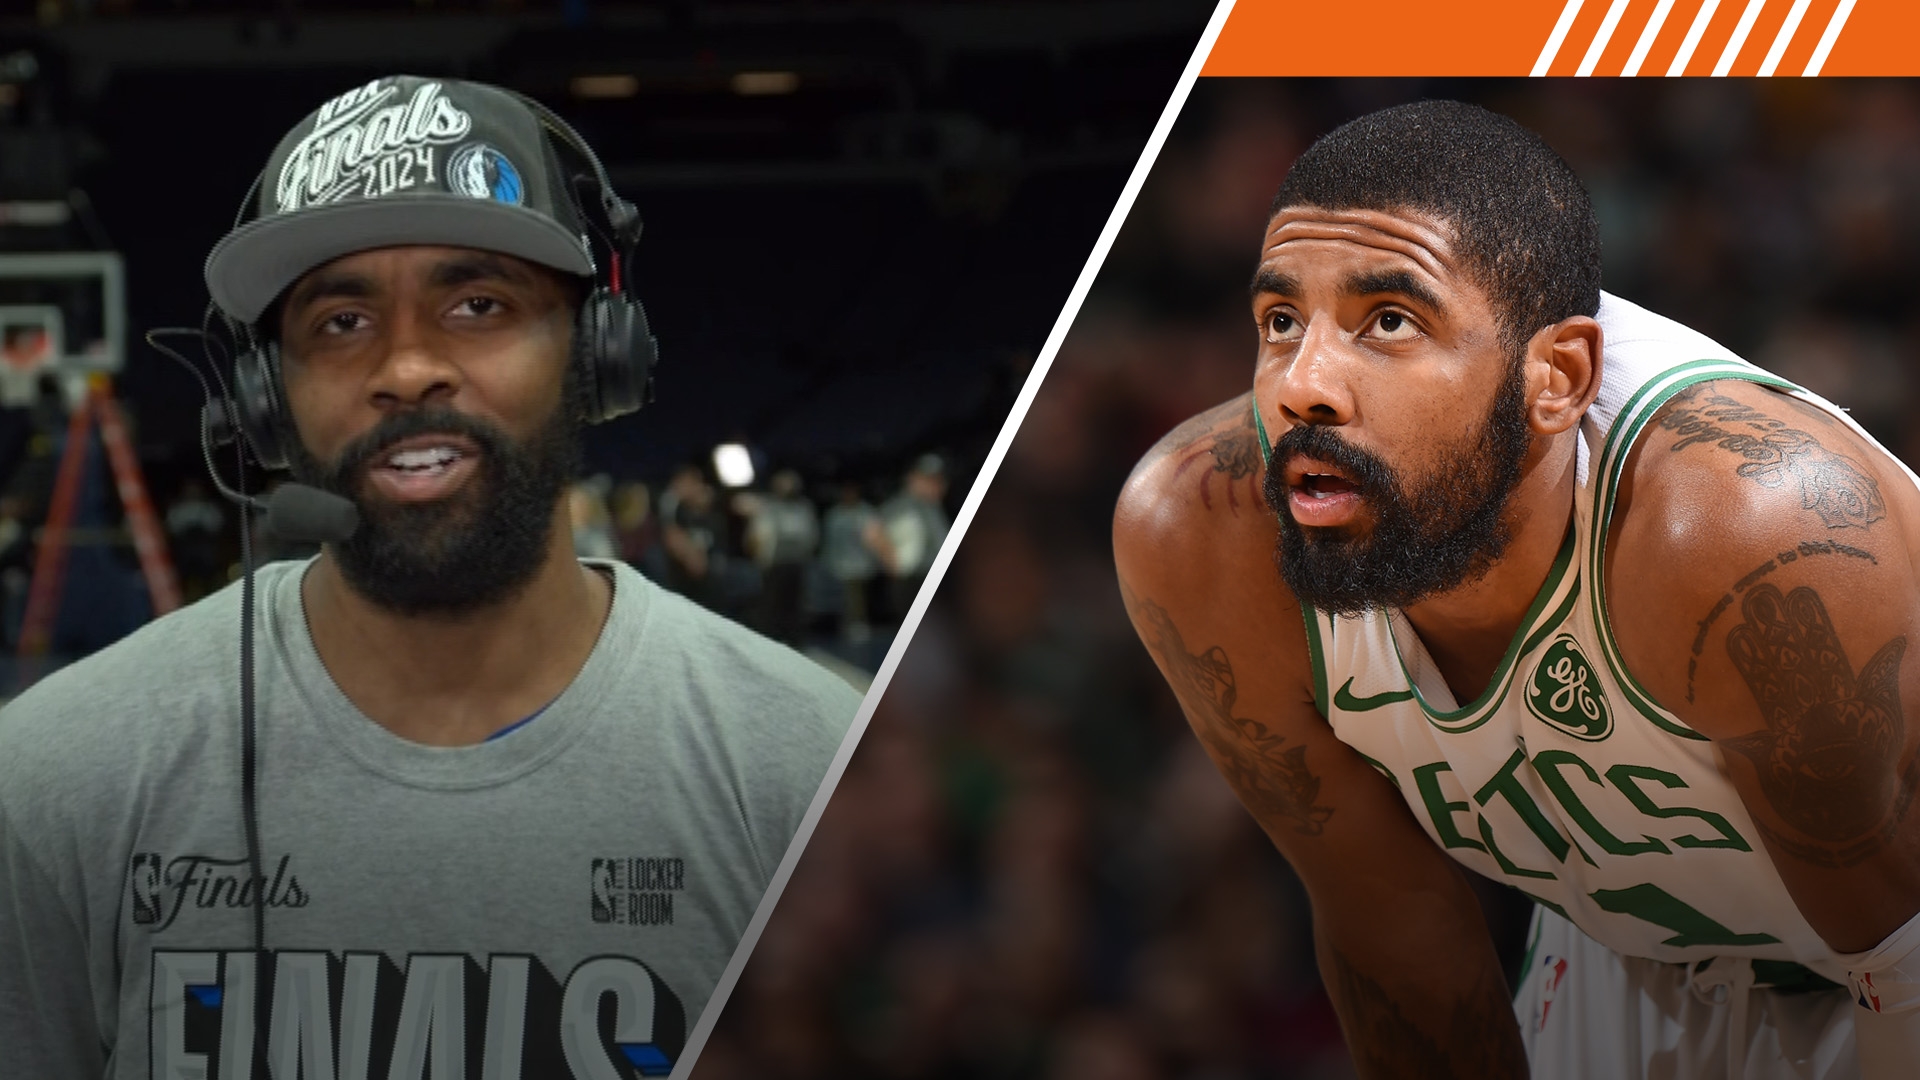 Kyrie Irving 'ready' for return to Boston to face former team